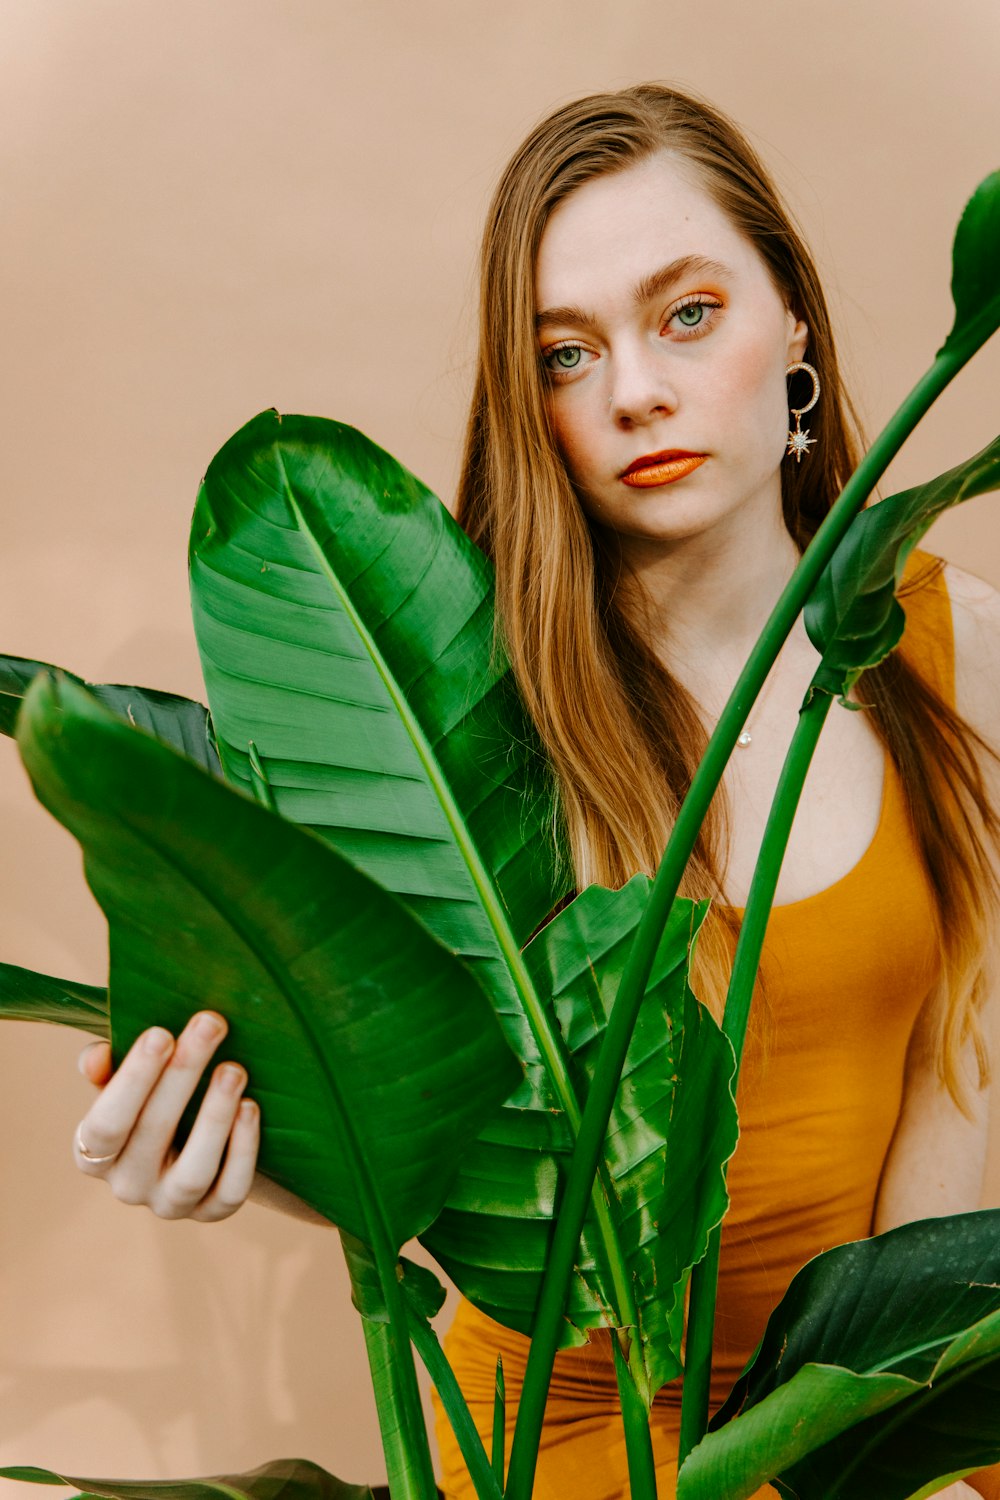 Woman in yellow tank top holding green leaves photo – Free Leaf